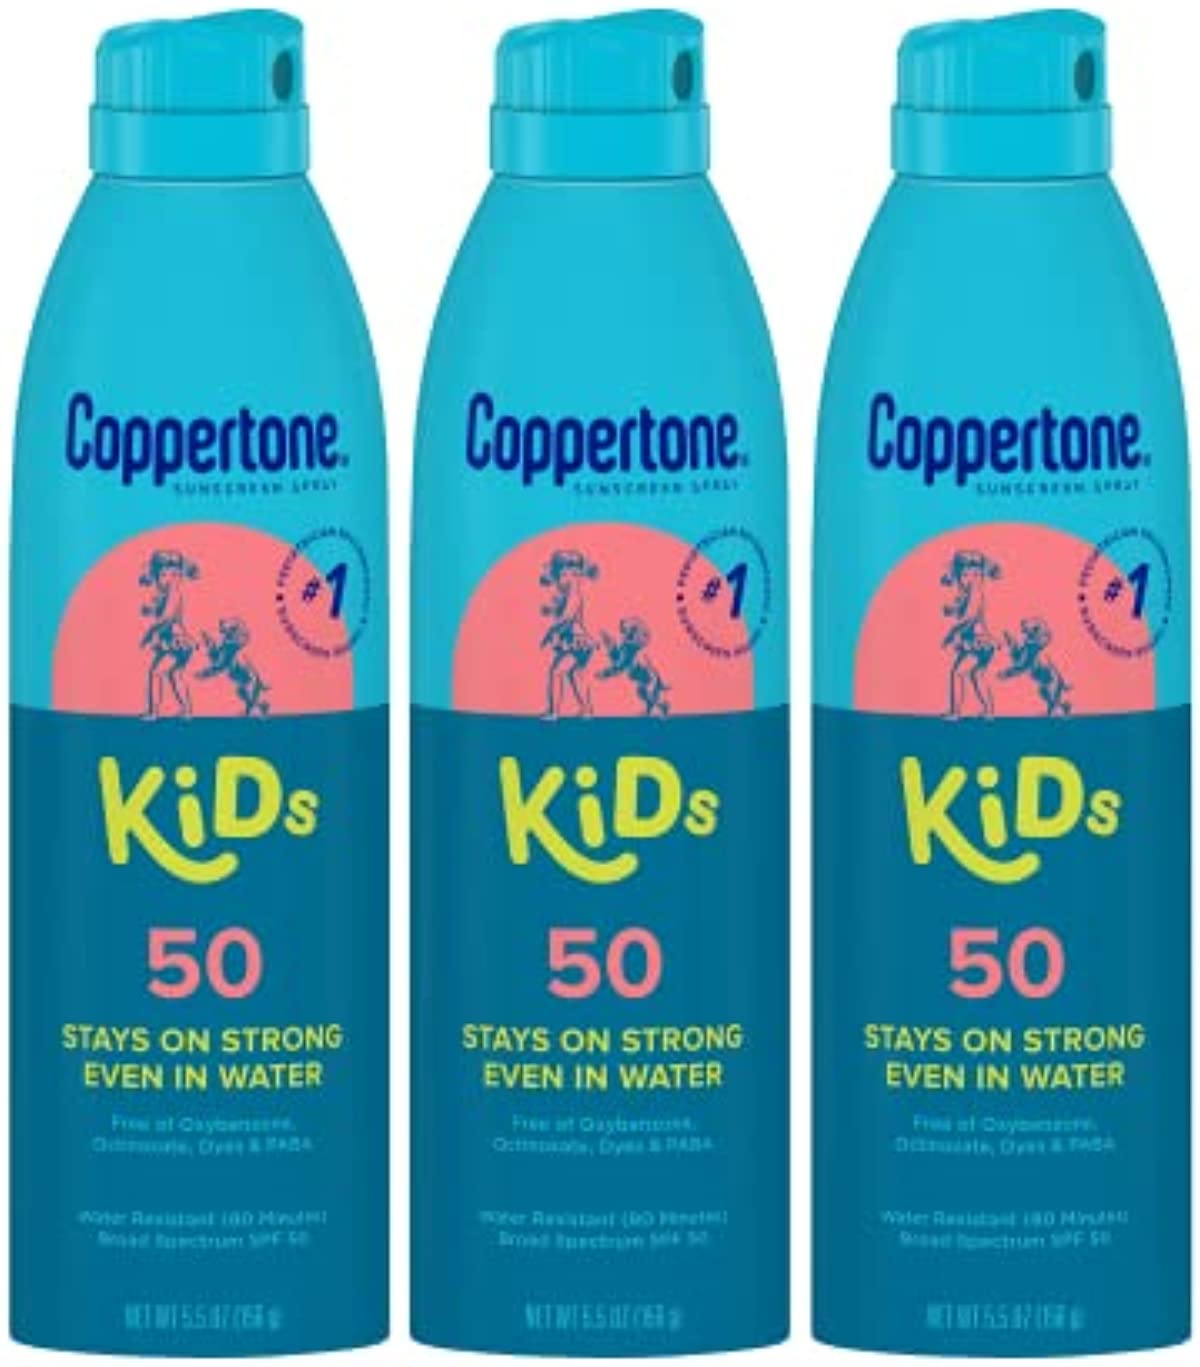 Coppertone KIDS Sunscreen Continuous Spray SPF 50 (5.5 Ounce, Pack of 3)